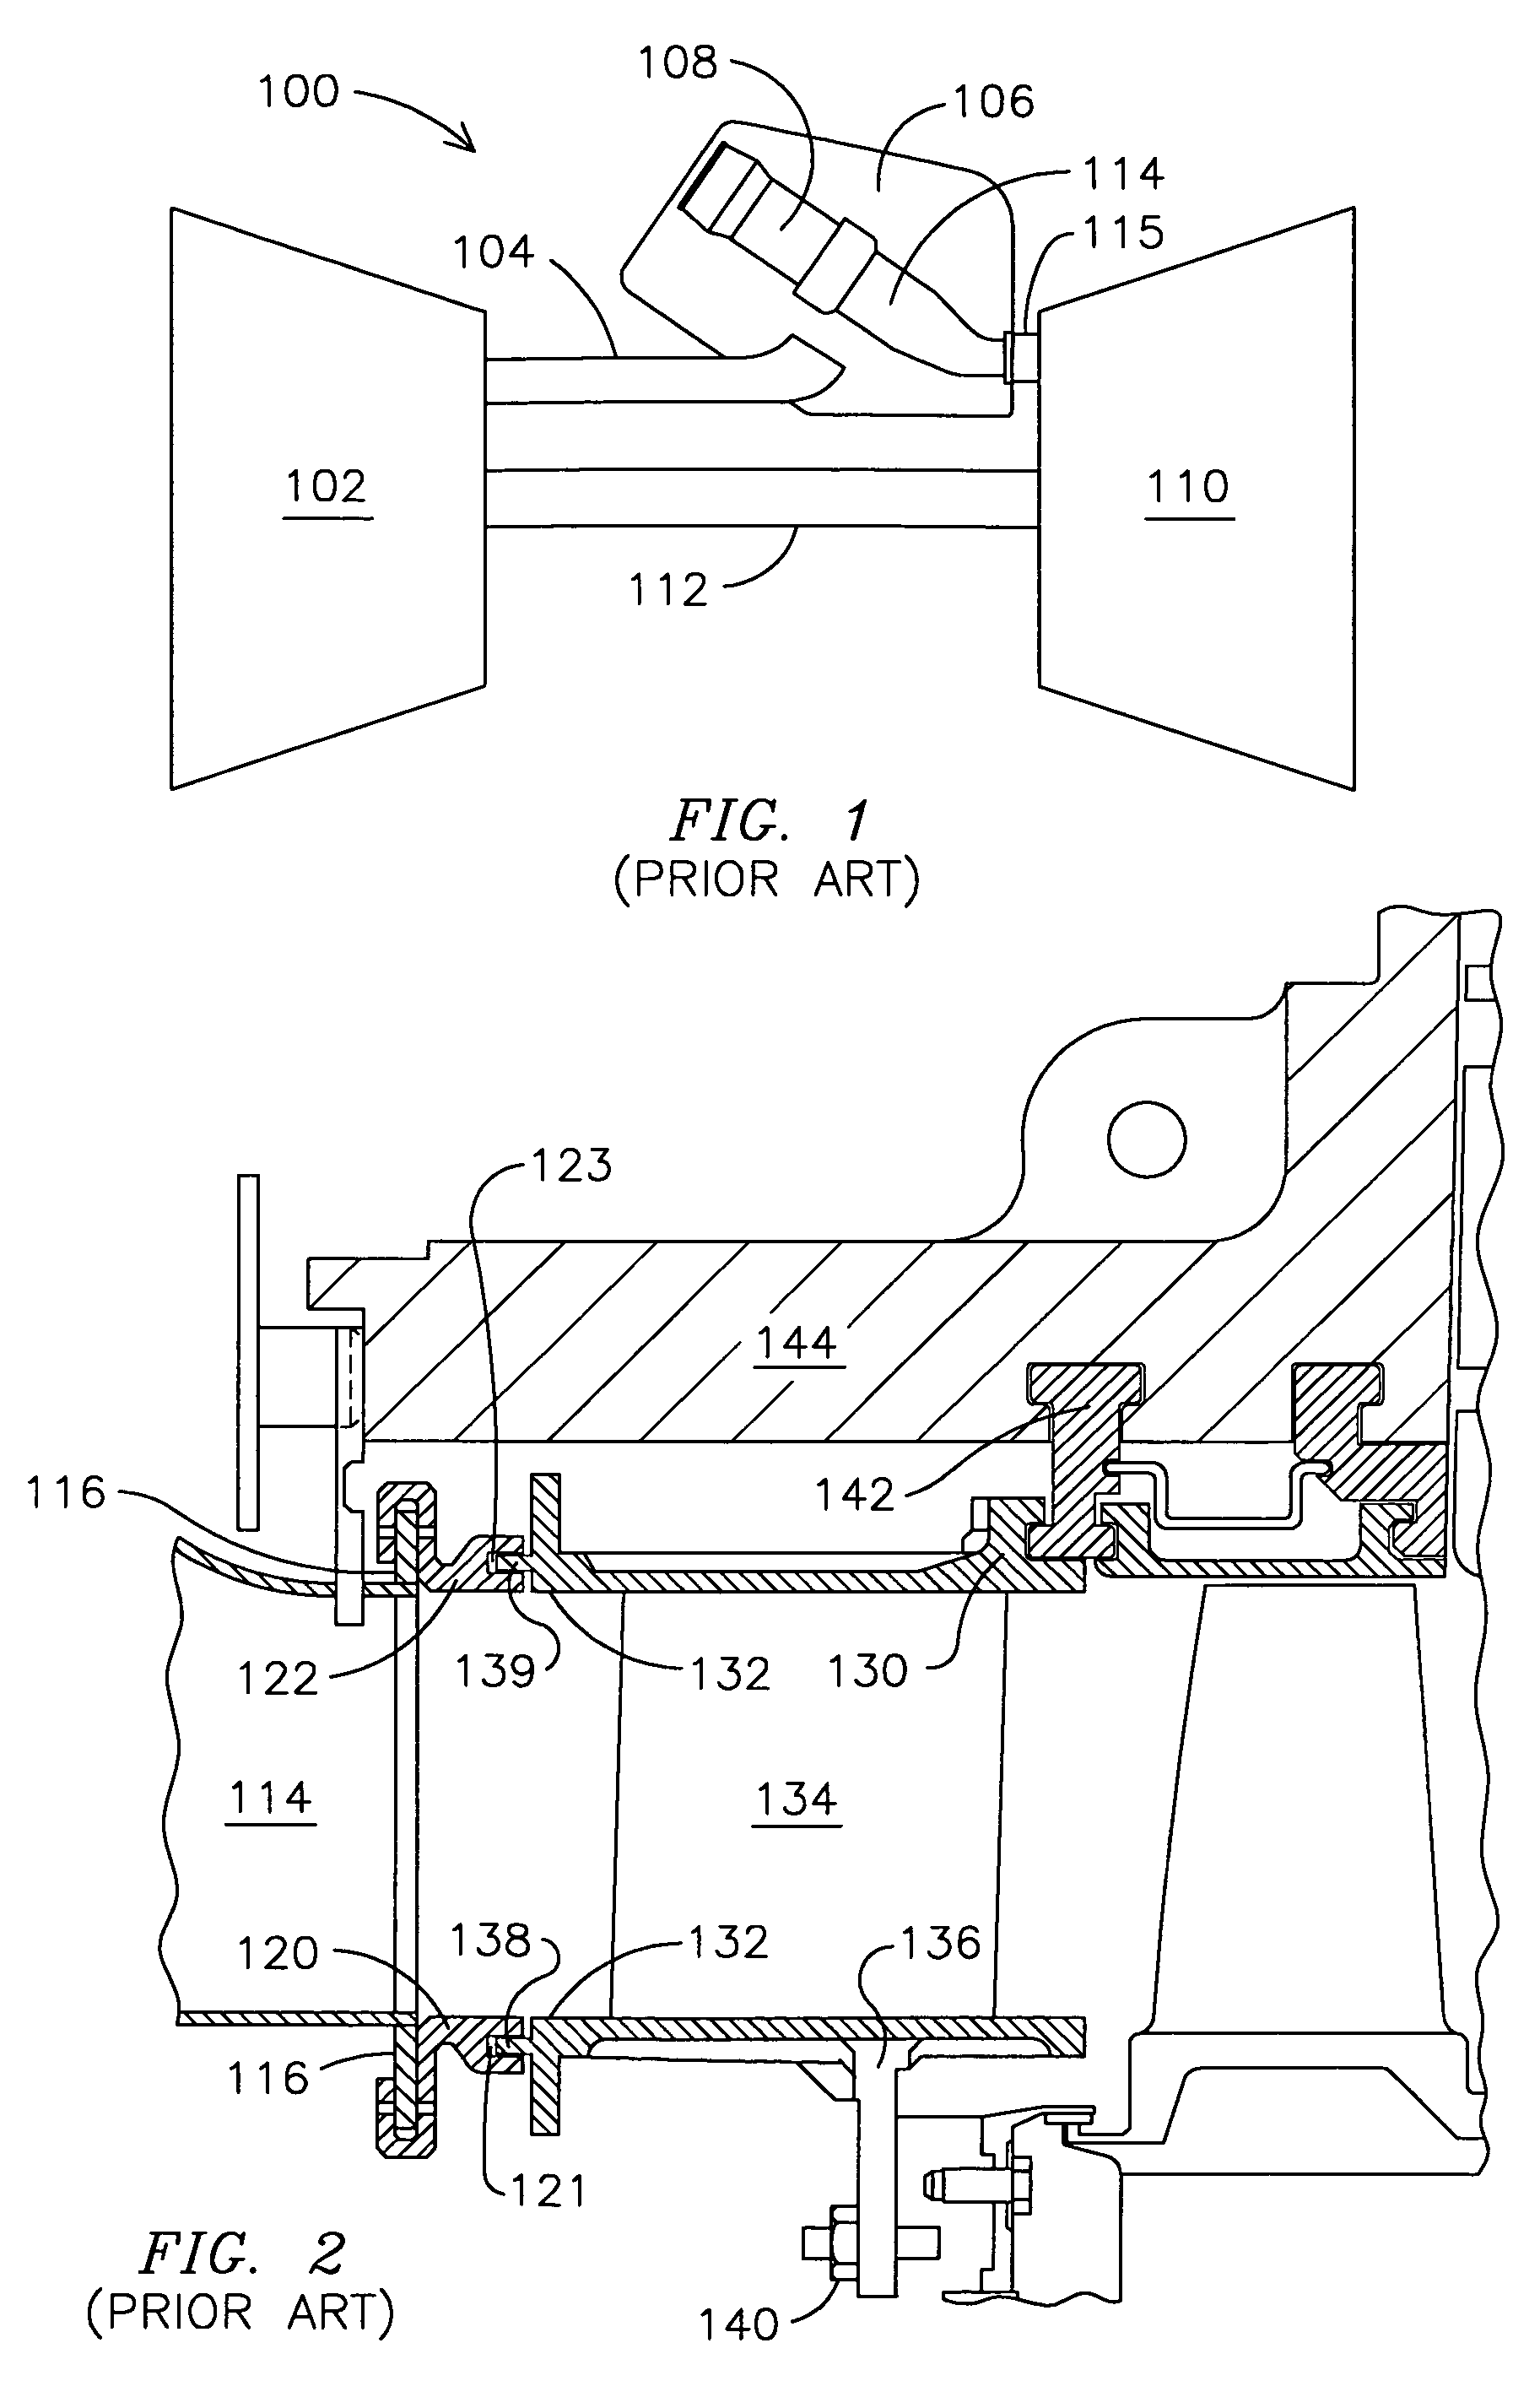 Slidable spring-loaded transition-to-turbine seal apparatus and heat-shielding system, comprising the seal, at transition/turbine junction of a gas turbine engine